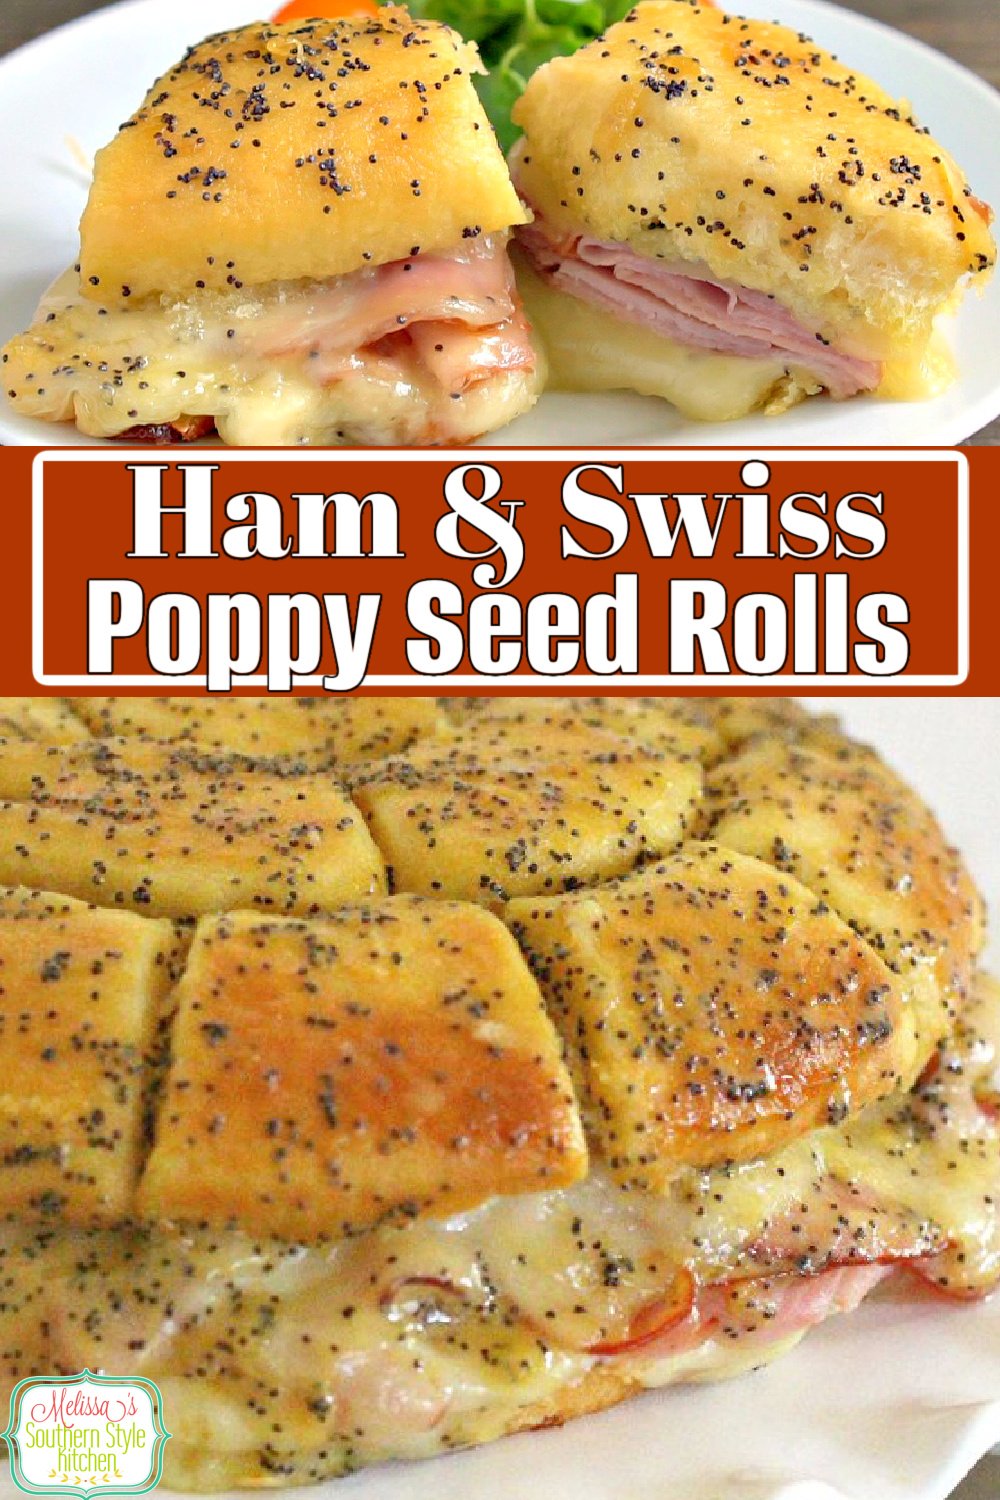 Kick start the party with these gooey pull apart Ham and Swiss Poppy Seed Rolls #hamrolls #hamandswiss #pullapartrolls #poppyseedrolls #hamrecipes #appetizers #sandwiches #sliders #hamandswisspoppyseedrolls #southernfood #holidayappetizers #southernrecipes via @melissasssk